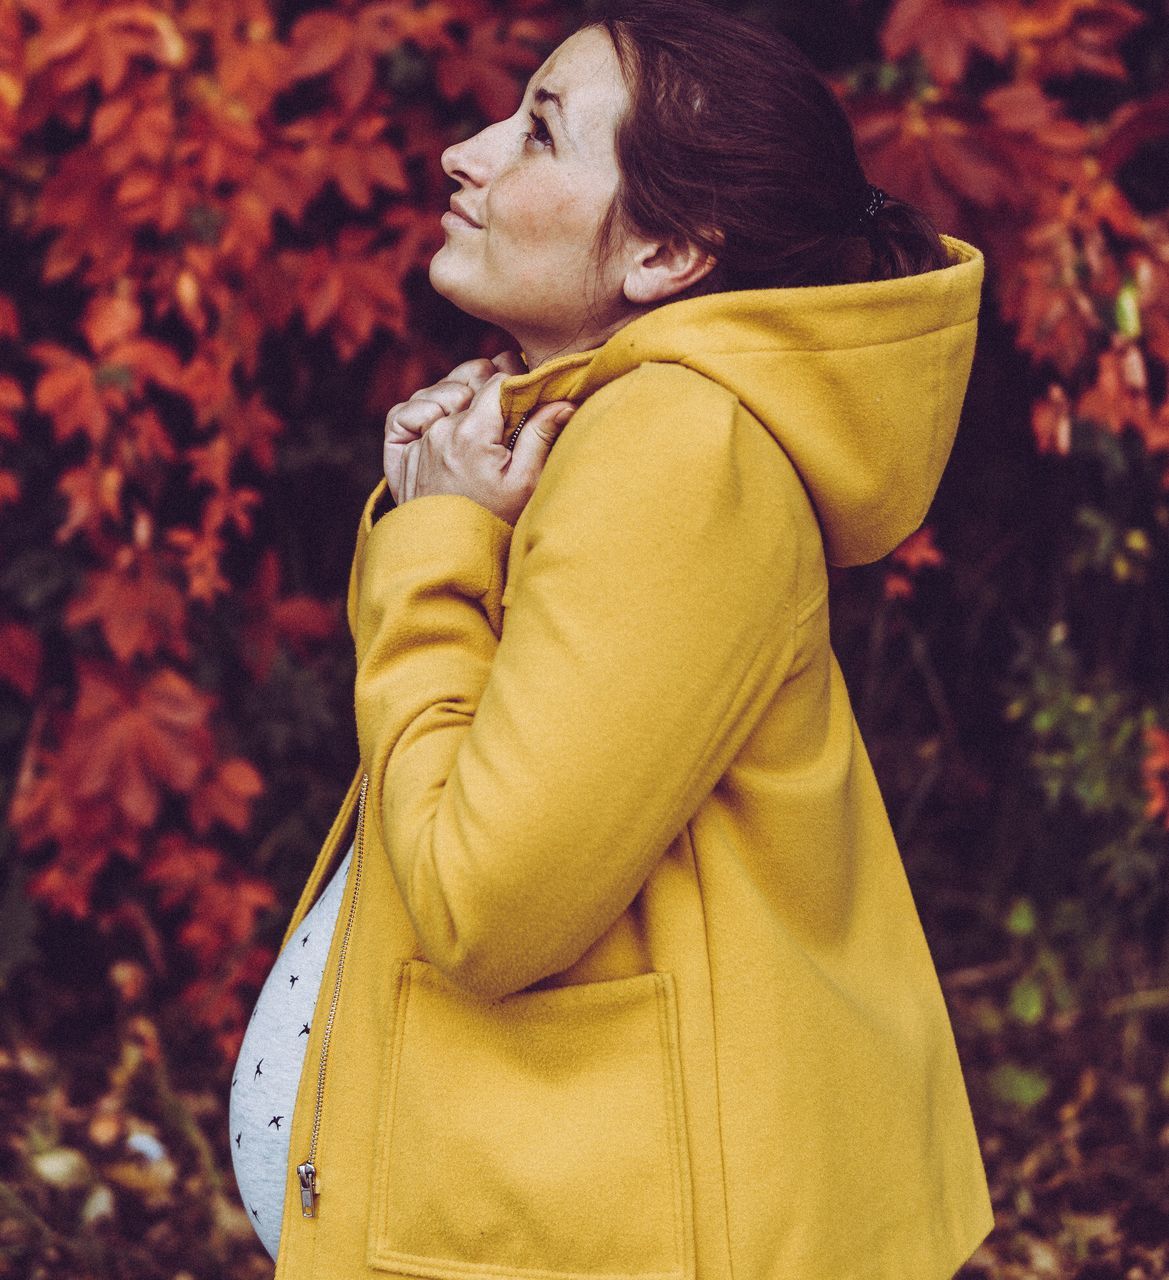 autumn, leaf, one person, real people, lifestyles, outdoors, jacket, embracing, women, yellow, standing, day, nature, young women, warm clothing, young adult, adult, people